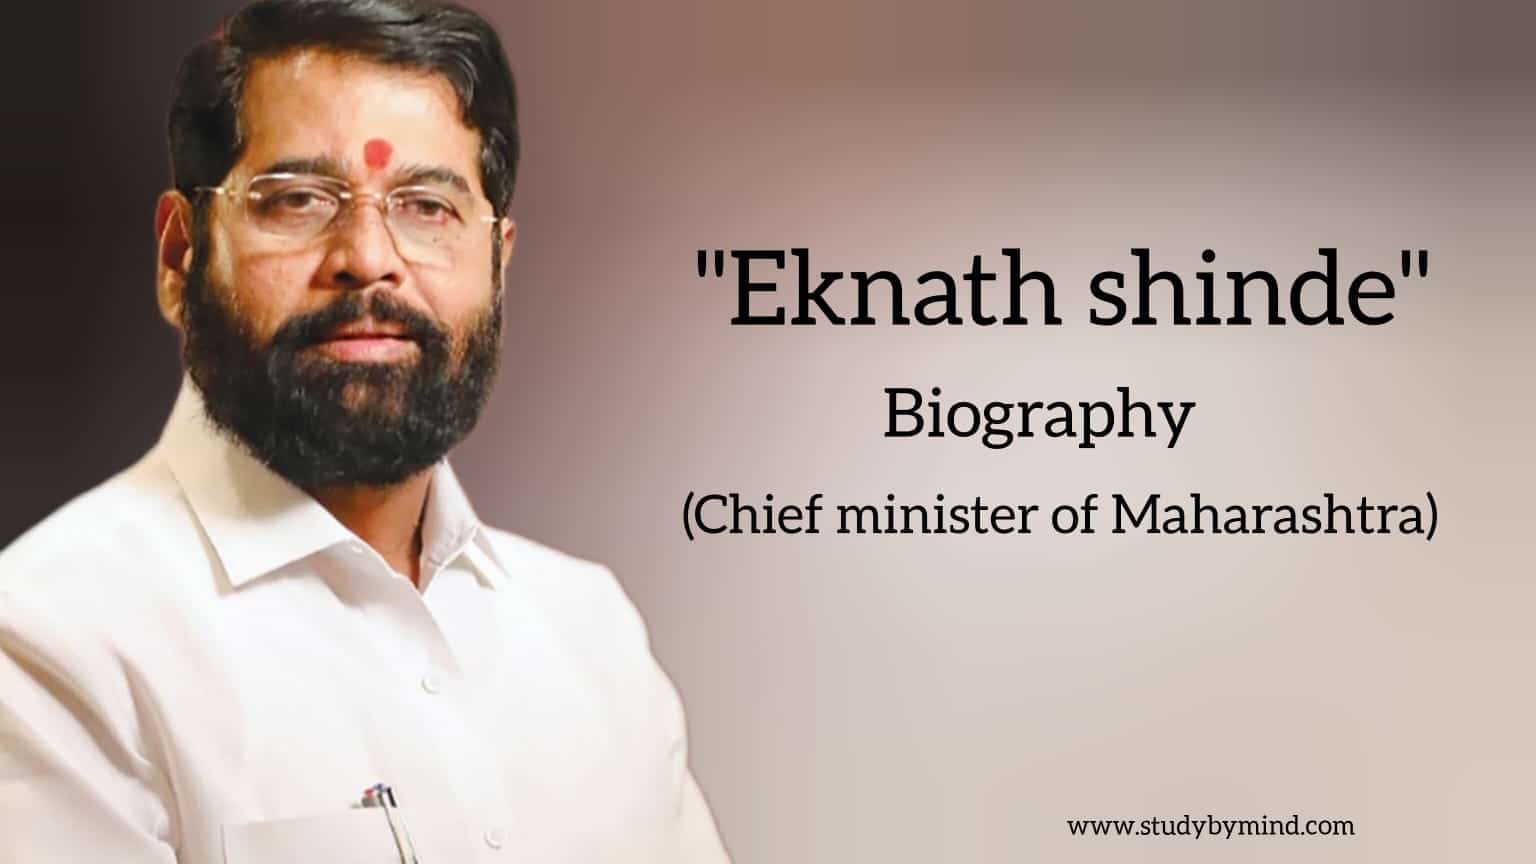 You are currently viewing Eknath shinde biography in english (Chief Minister of Maharashtra)